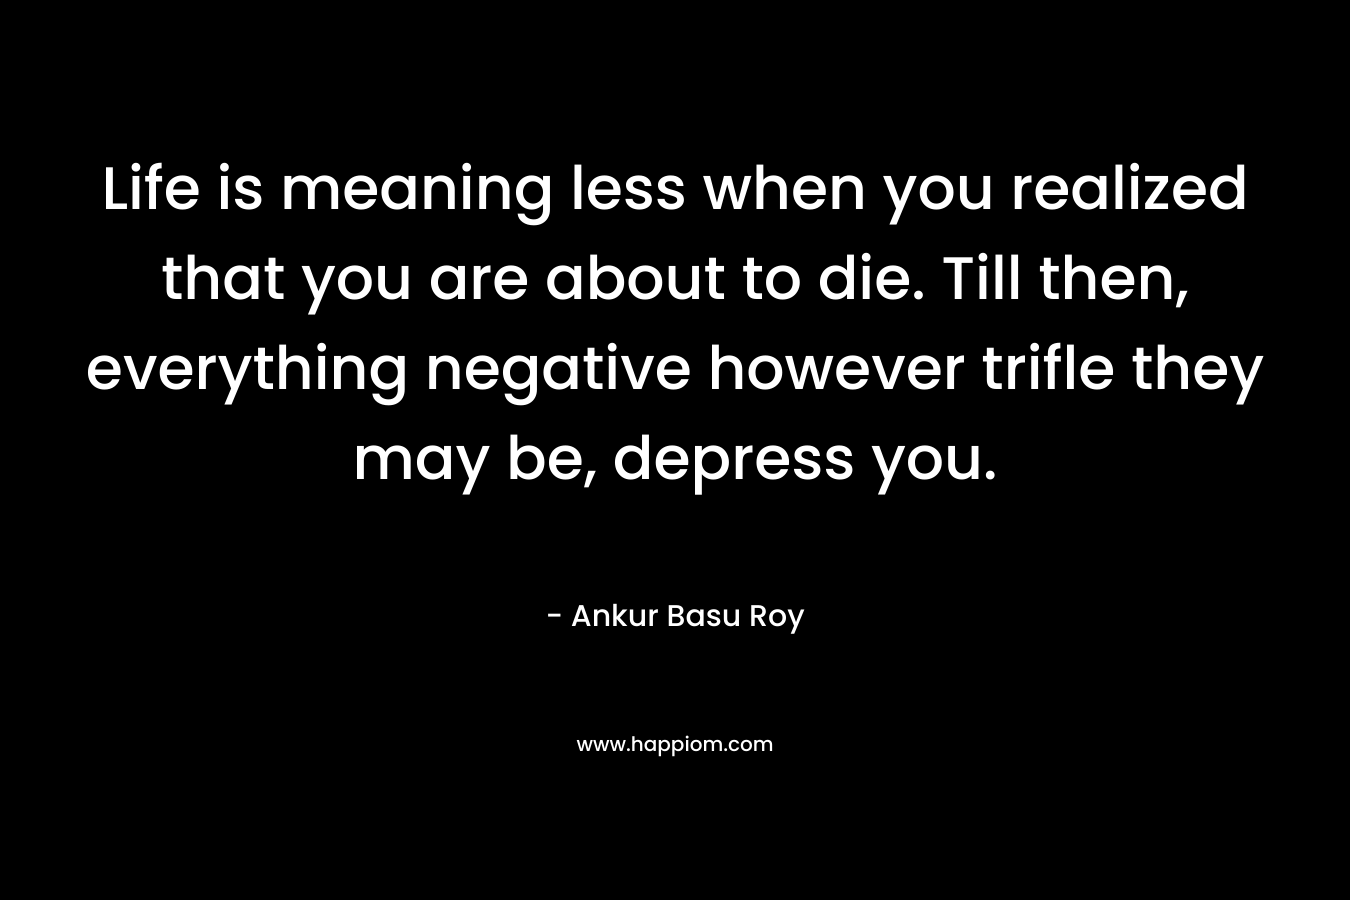 Life is meaning less when you realized that you are about to die. Till then, everything negative however trifle they may be, depress you.